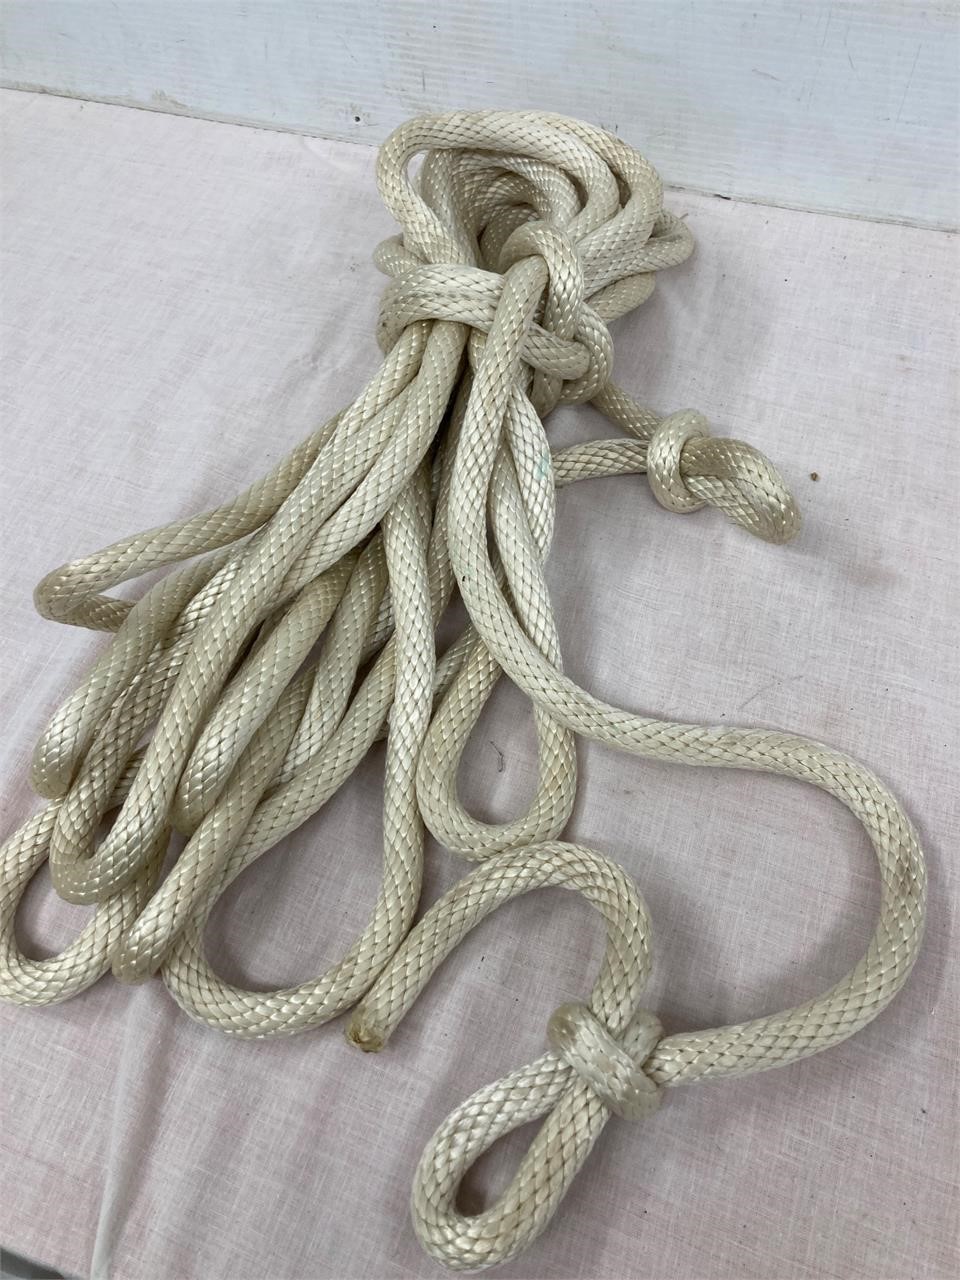 3/4” braided rope will be 18 to 20 ft.